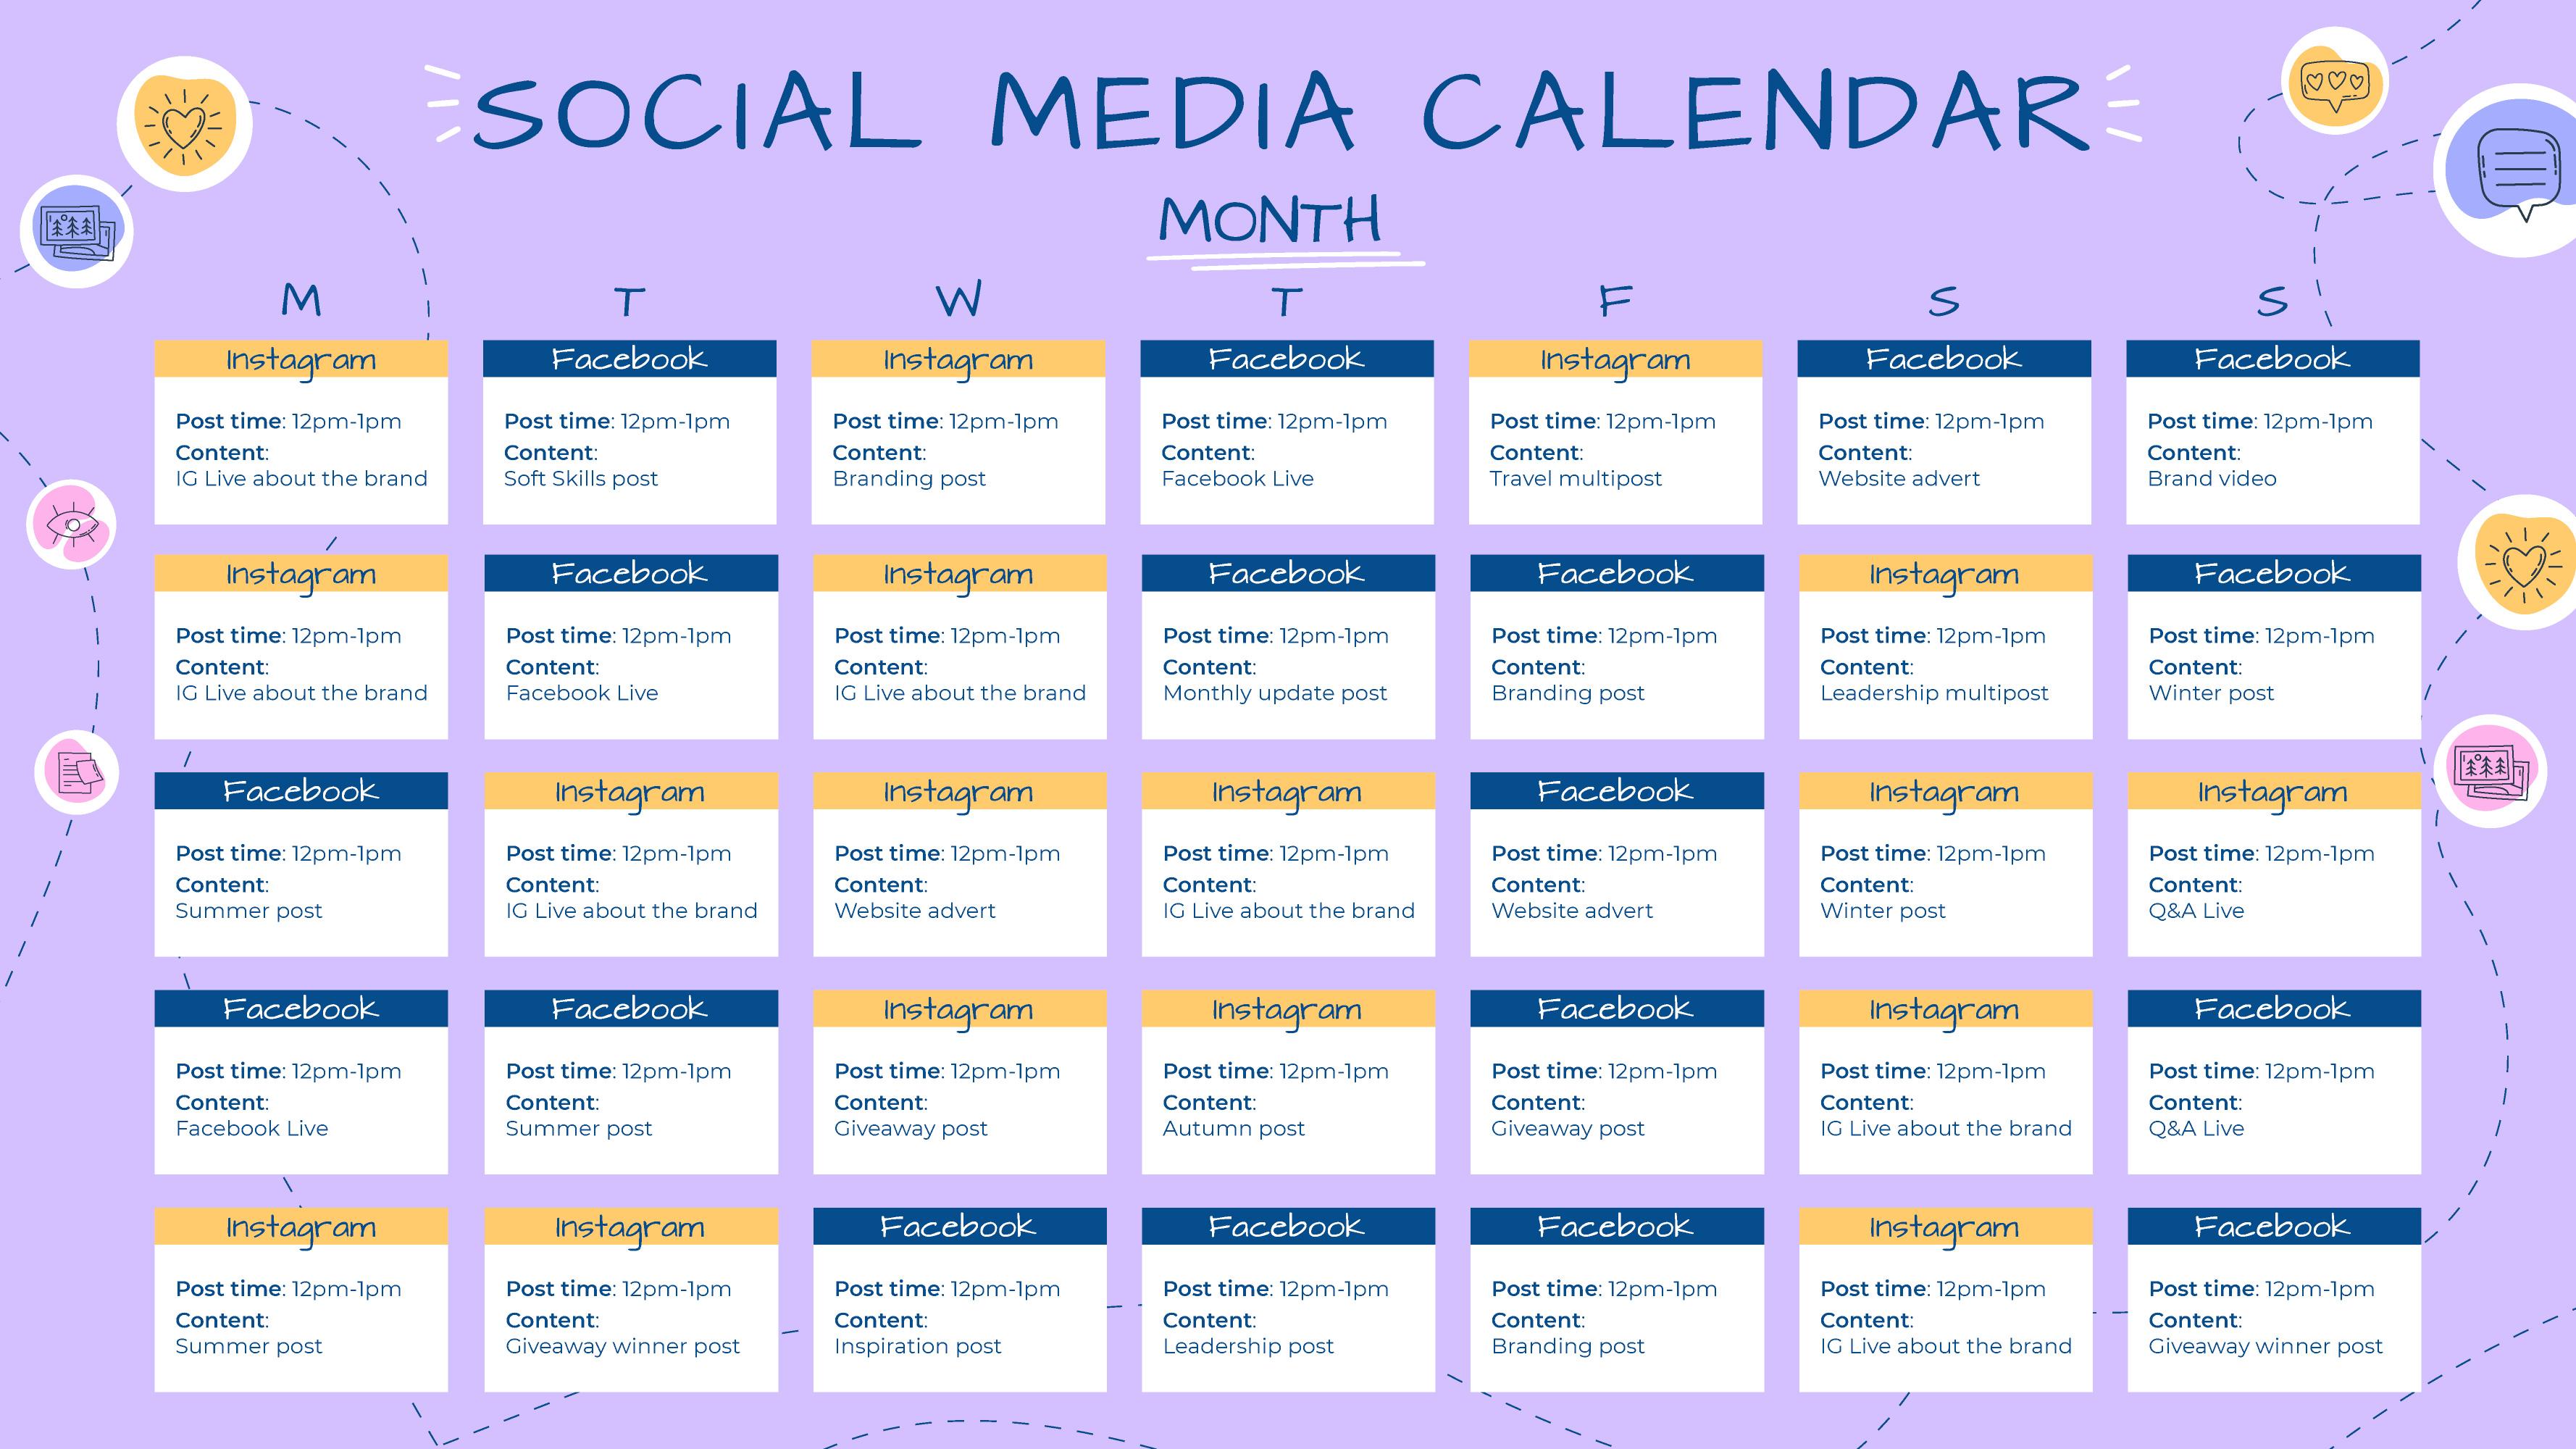 An illustration of a social media calendar that depicts the posting cycle for each day of the month.